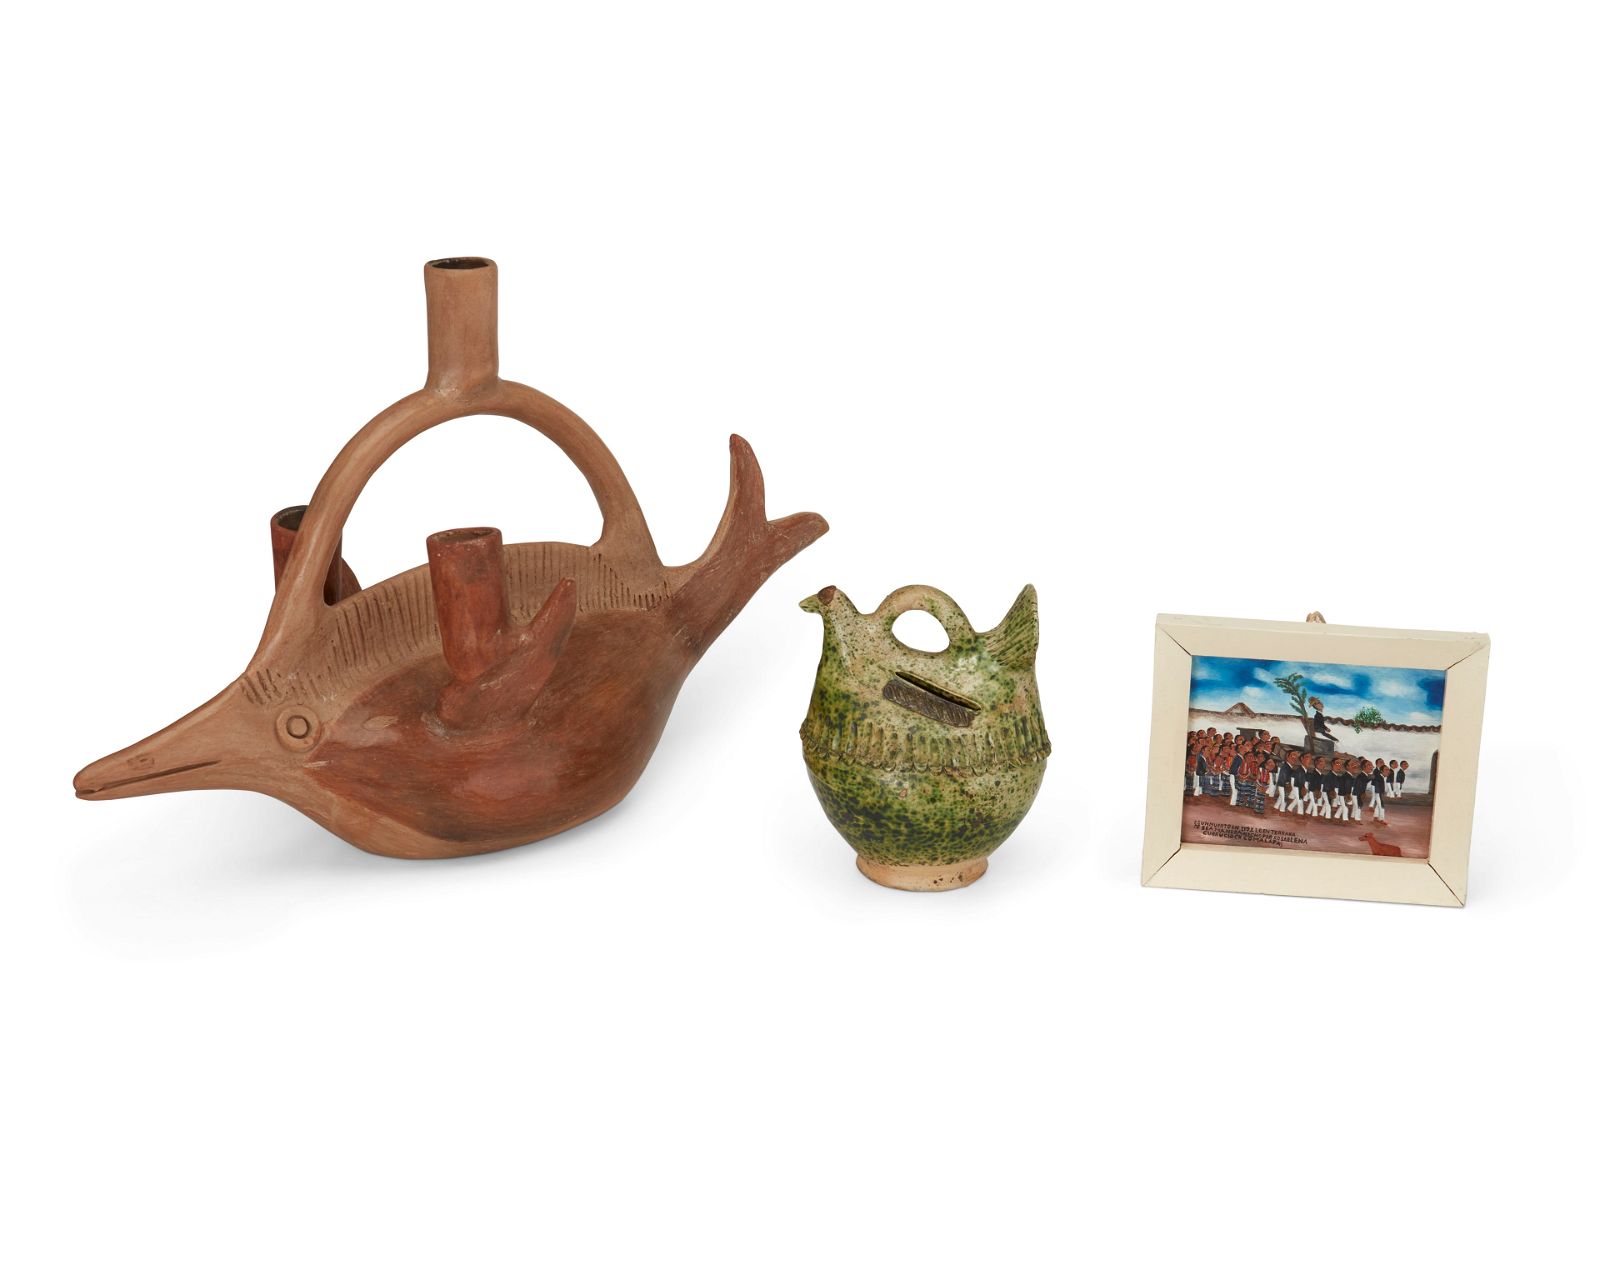 TWO CERAMIC VESSELS AND A KAQCHIKEL 3d0f10